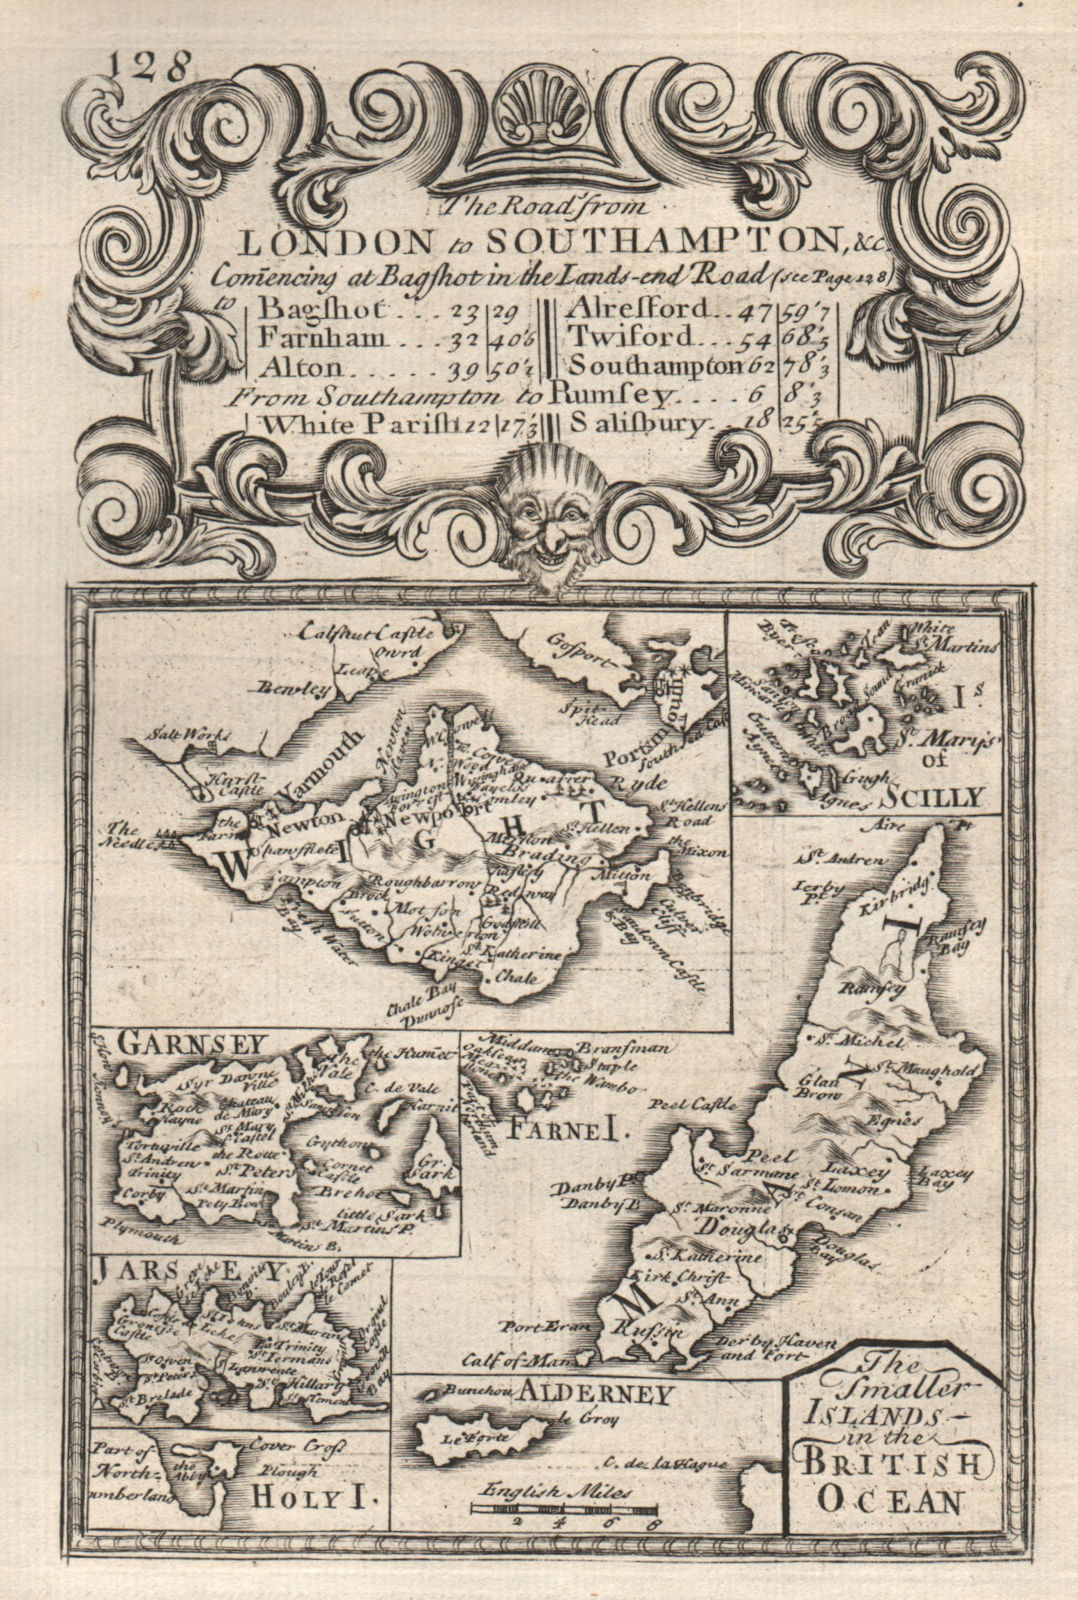 Associate Product 'Smaller Islands in the British Ocean' Isle of Wight Man Scilly. BOWEN 1753 map